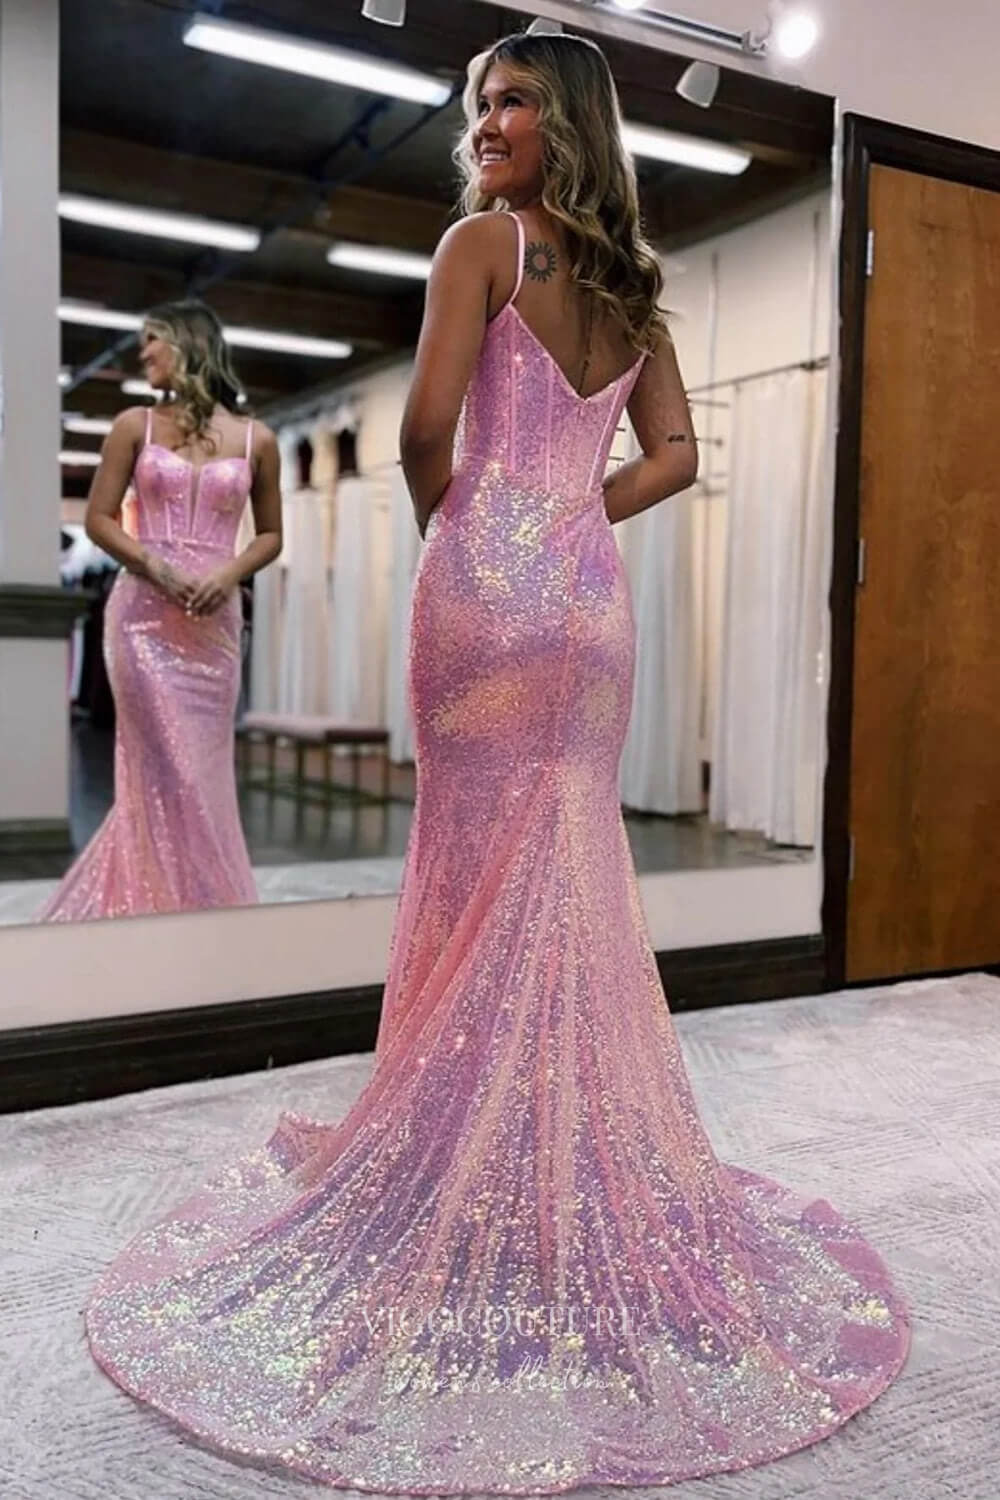 Sparkling Mermaid Sequin Prom Dress with Spaghetti Strap and Plunging –  vigocouture